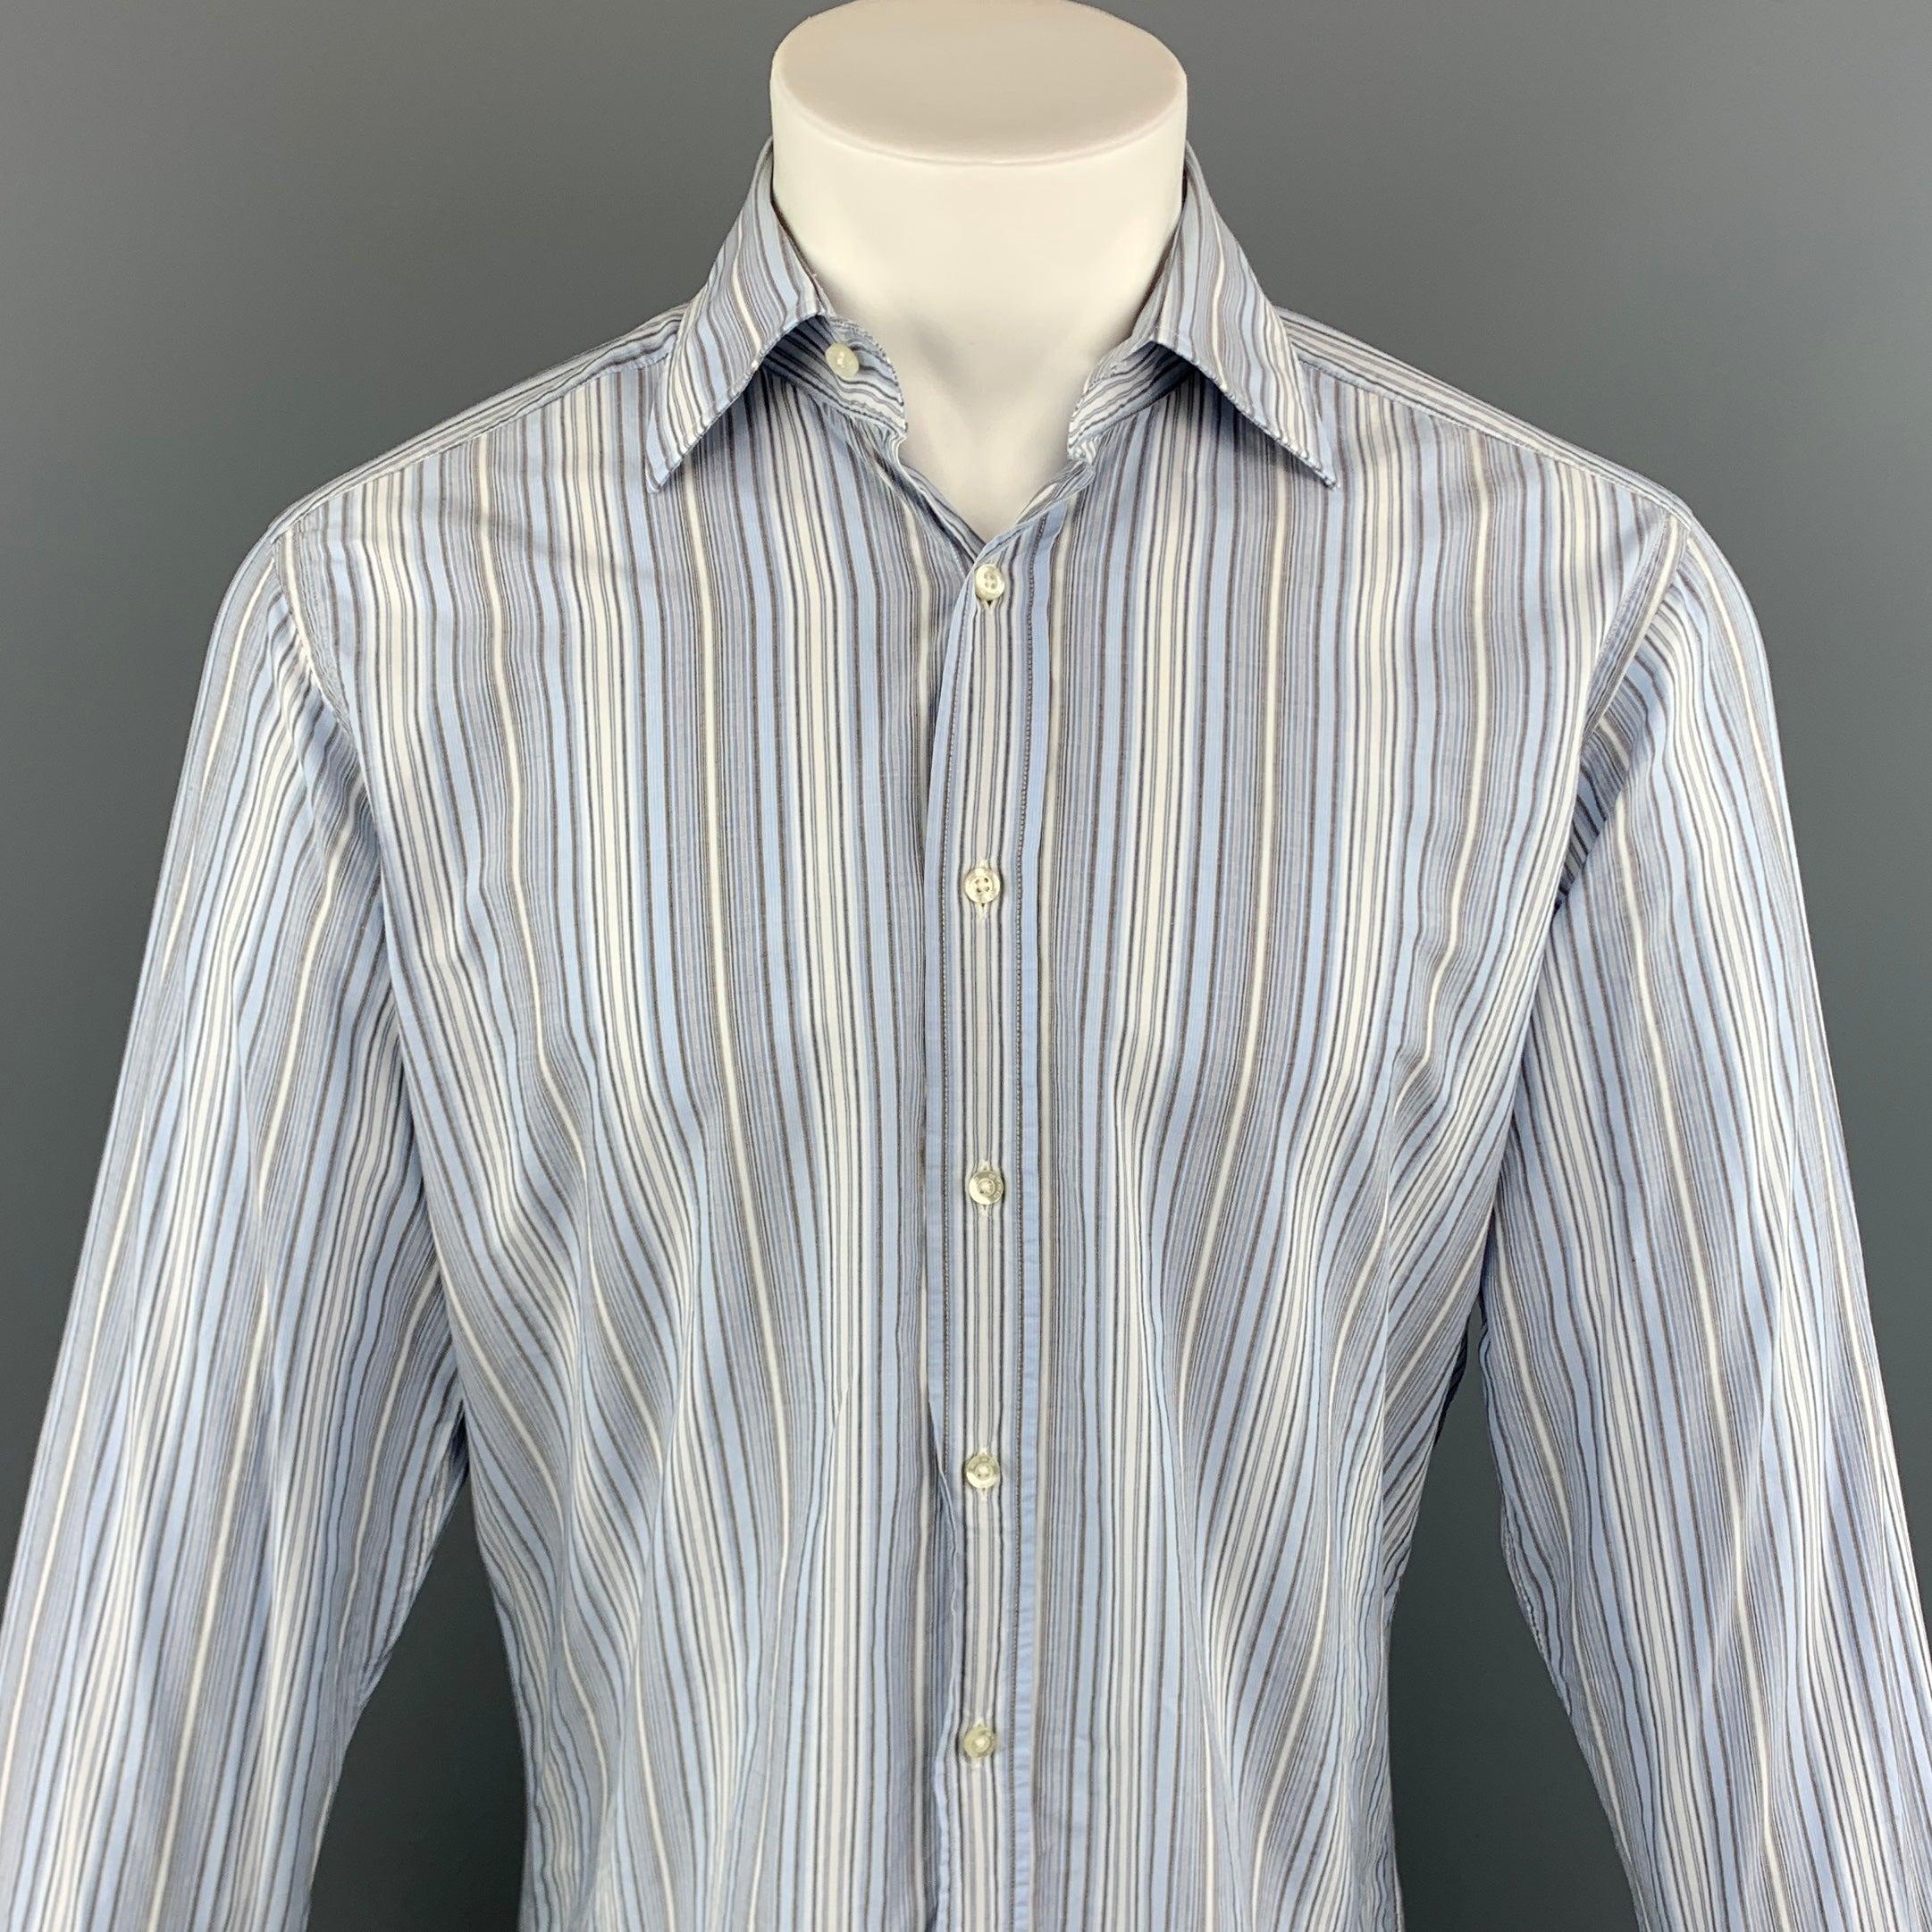 ETRO long sleeve shirt comes in a blue and gray stripe cotton featuring a button up style and a spread collar. Made in Italy.Excellent Pre-Owned Condition. 

Marked:   40 

Measurements: 
 
Shoulder: 17 inches  Chest: 46 inches  Sleeve: 26.5 inches 